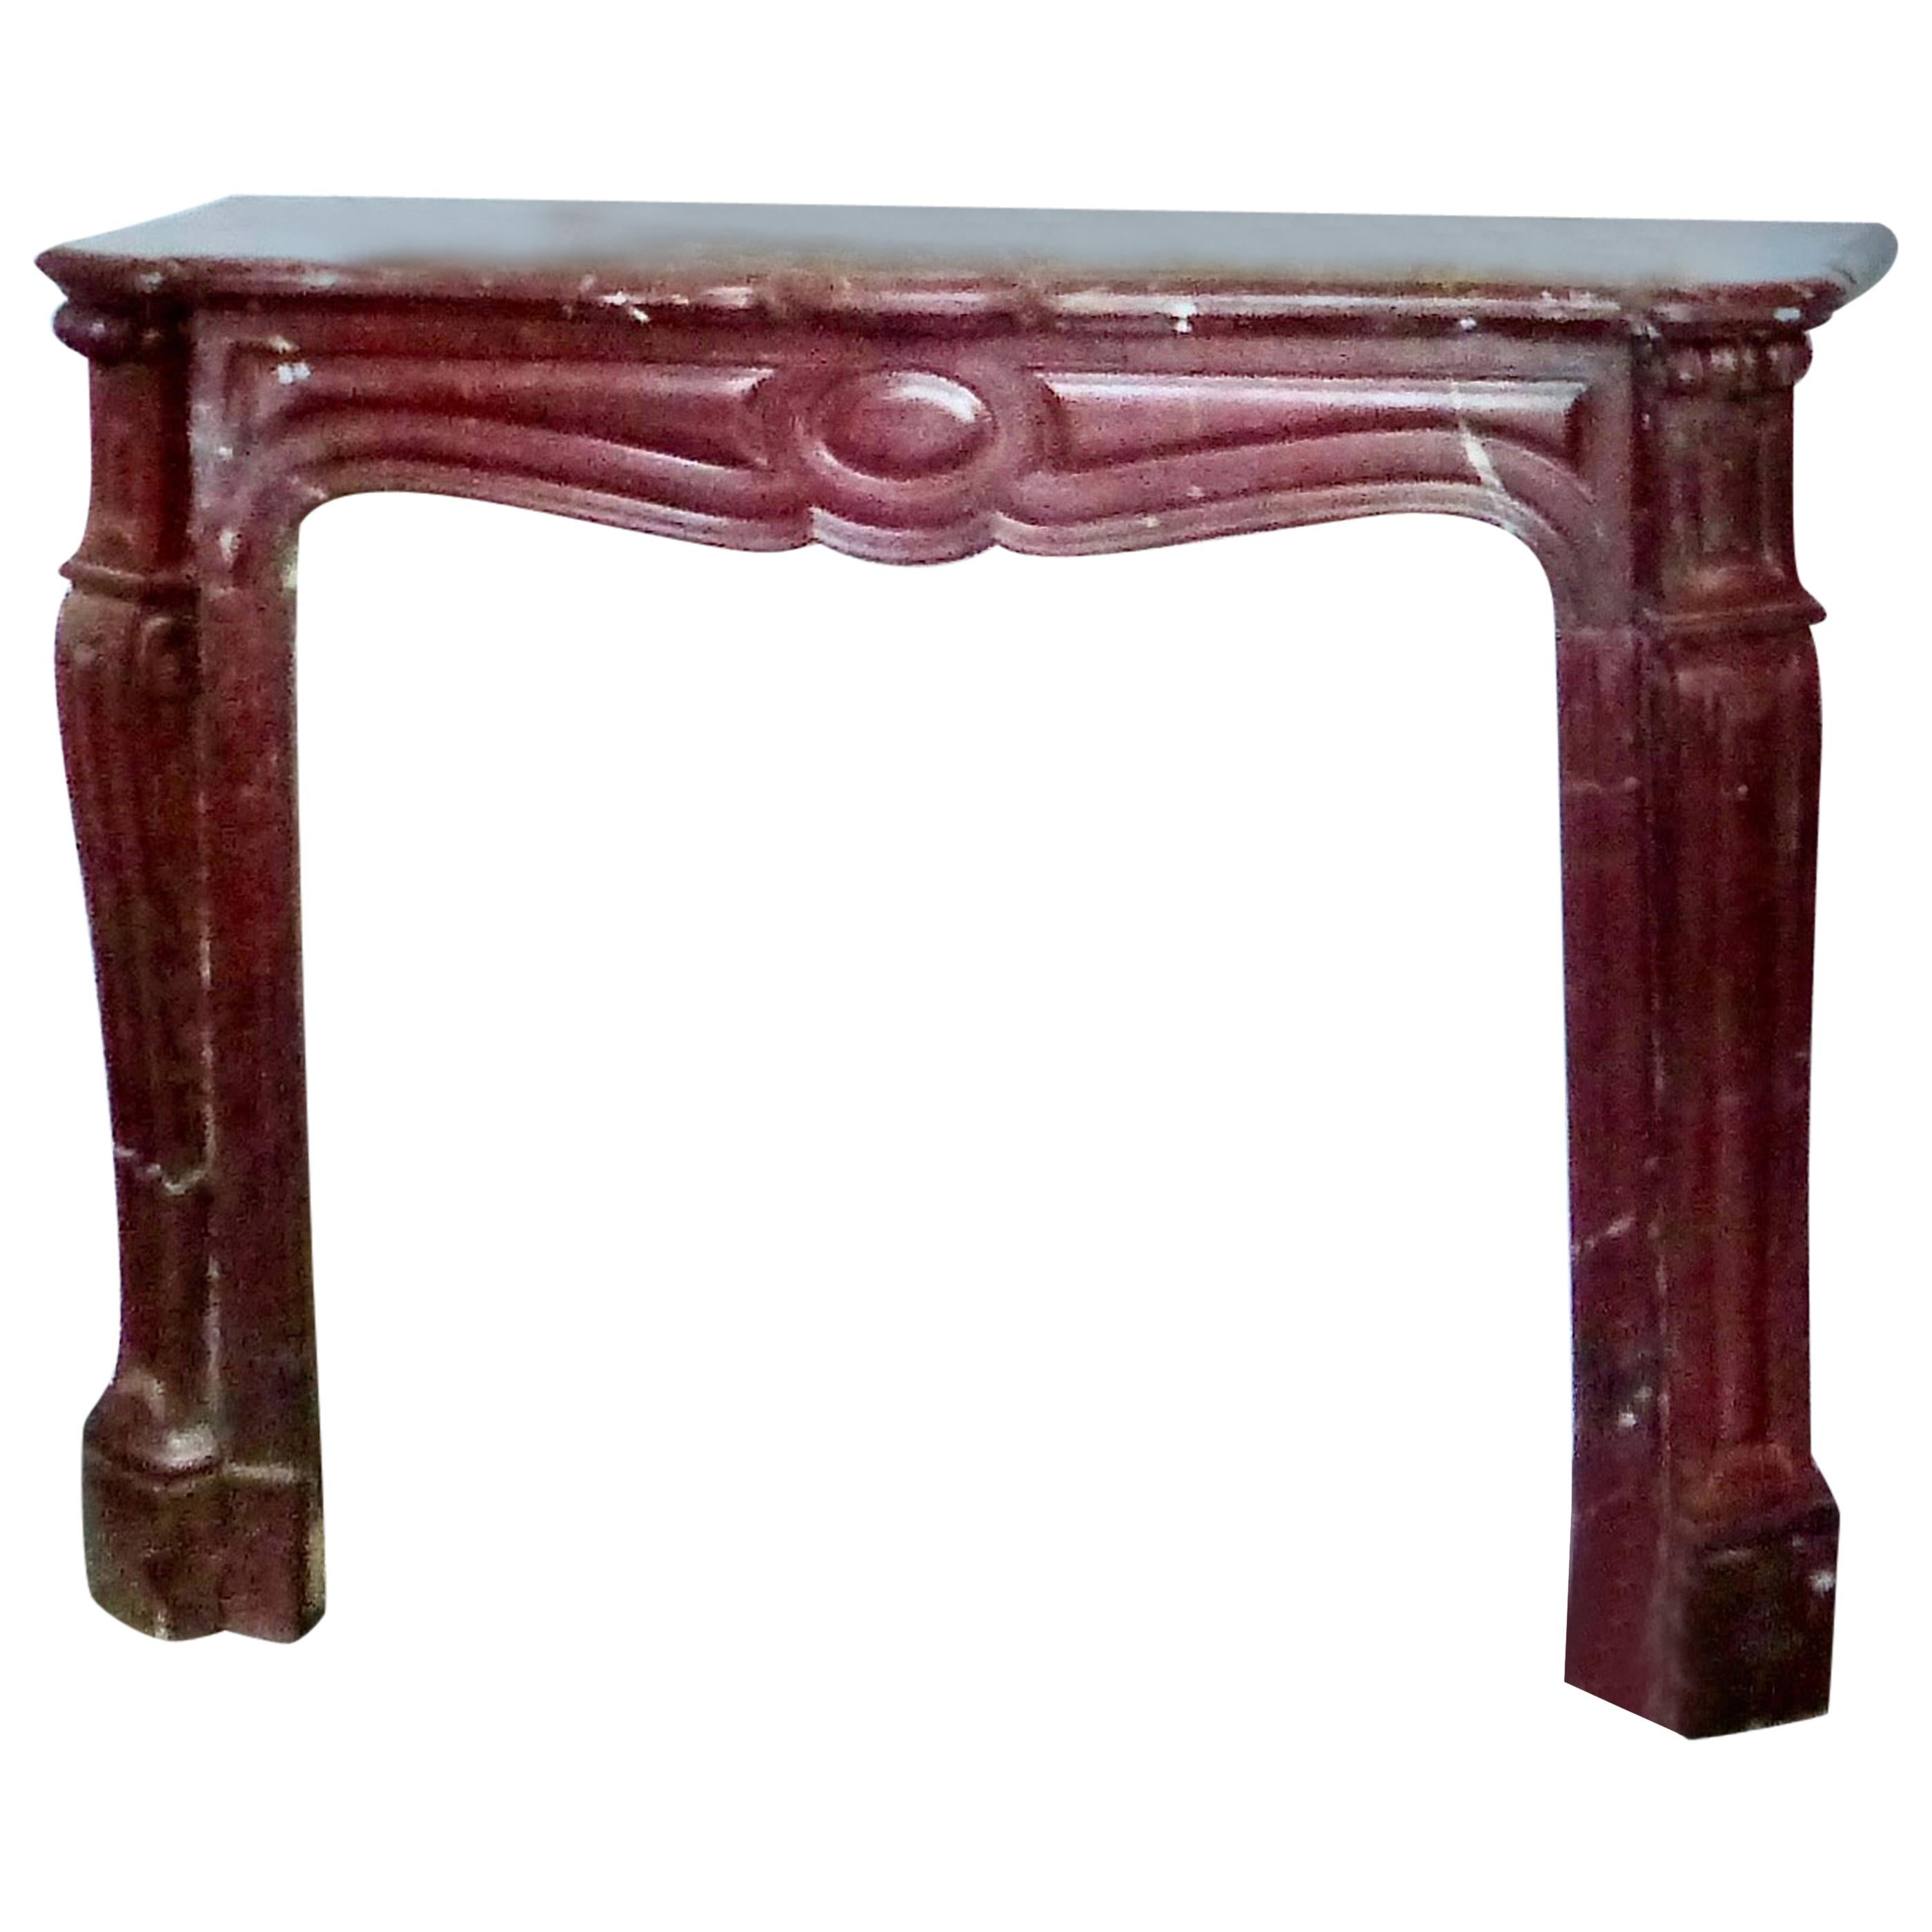 1880-1890 French ‘Rouge de Rance' Fireplace Surround Mantel For Sale